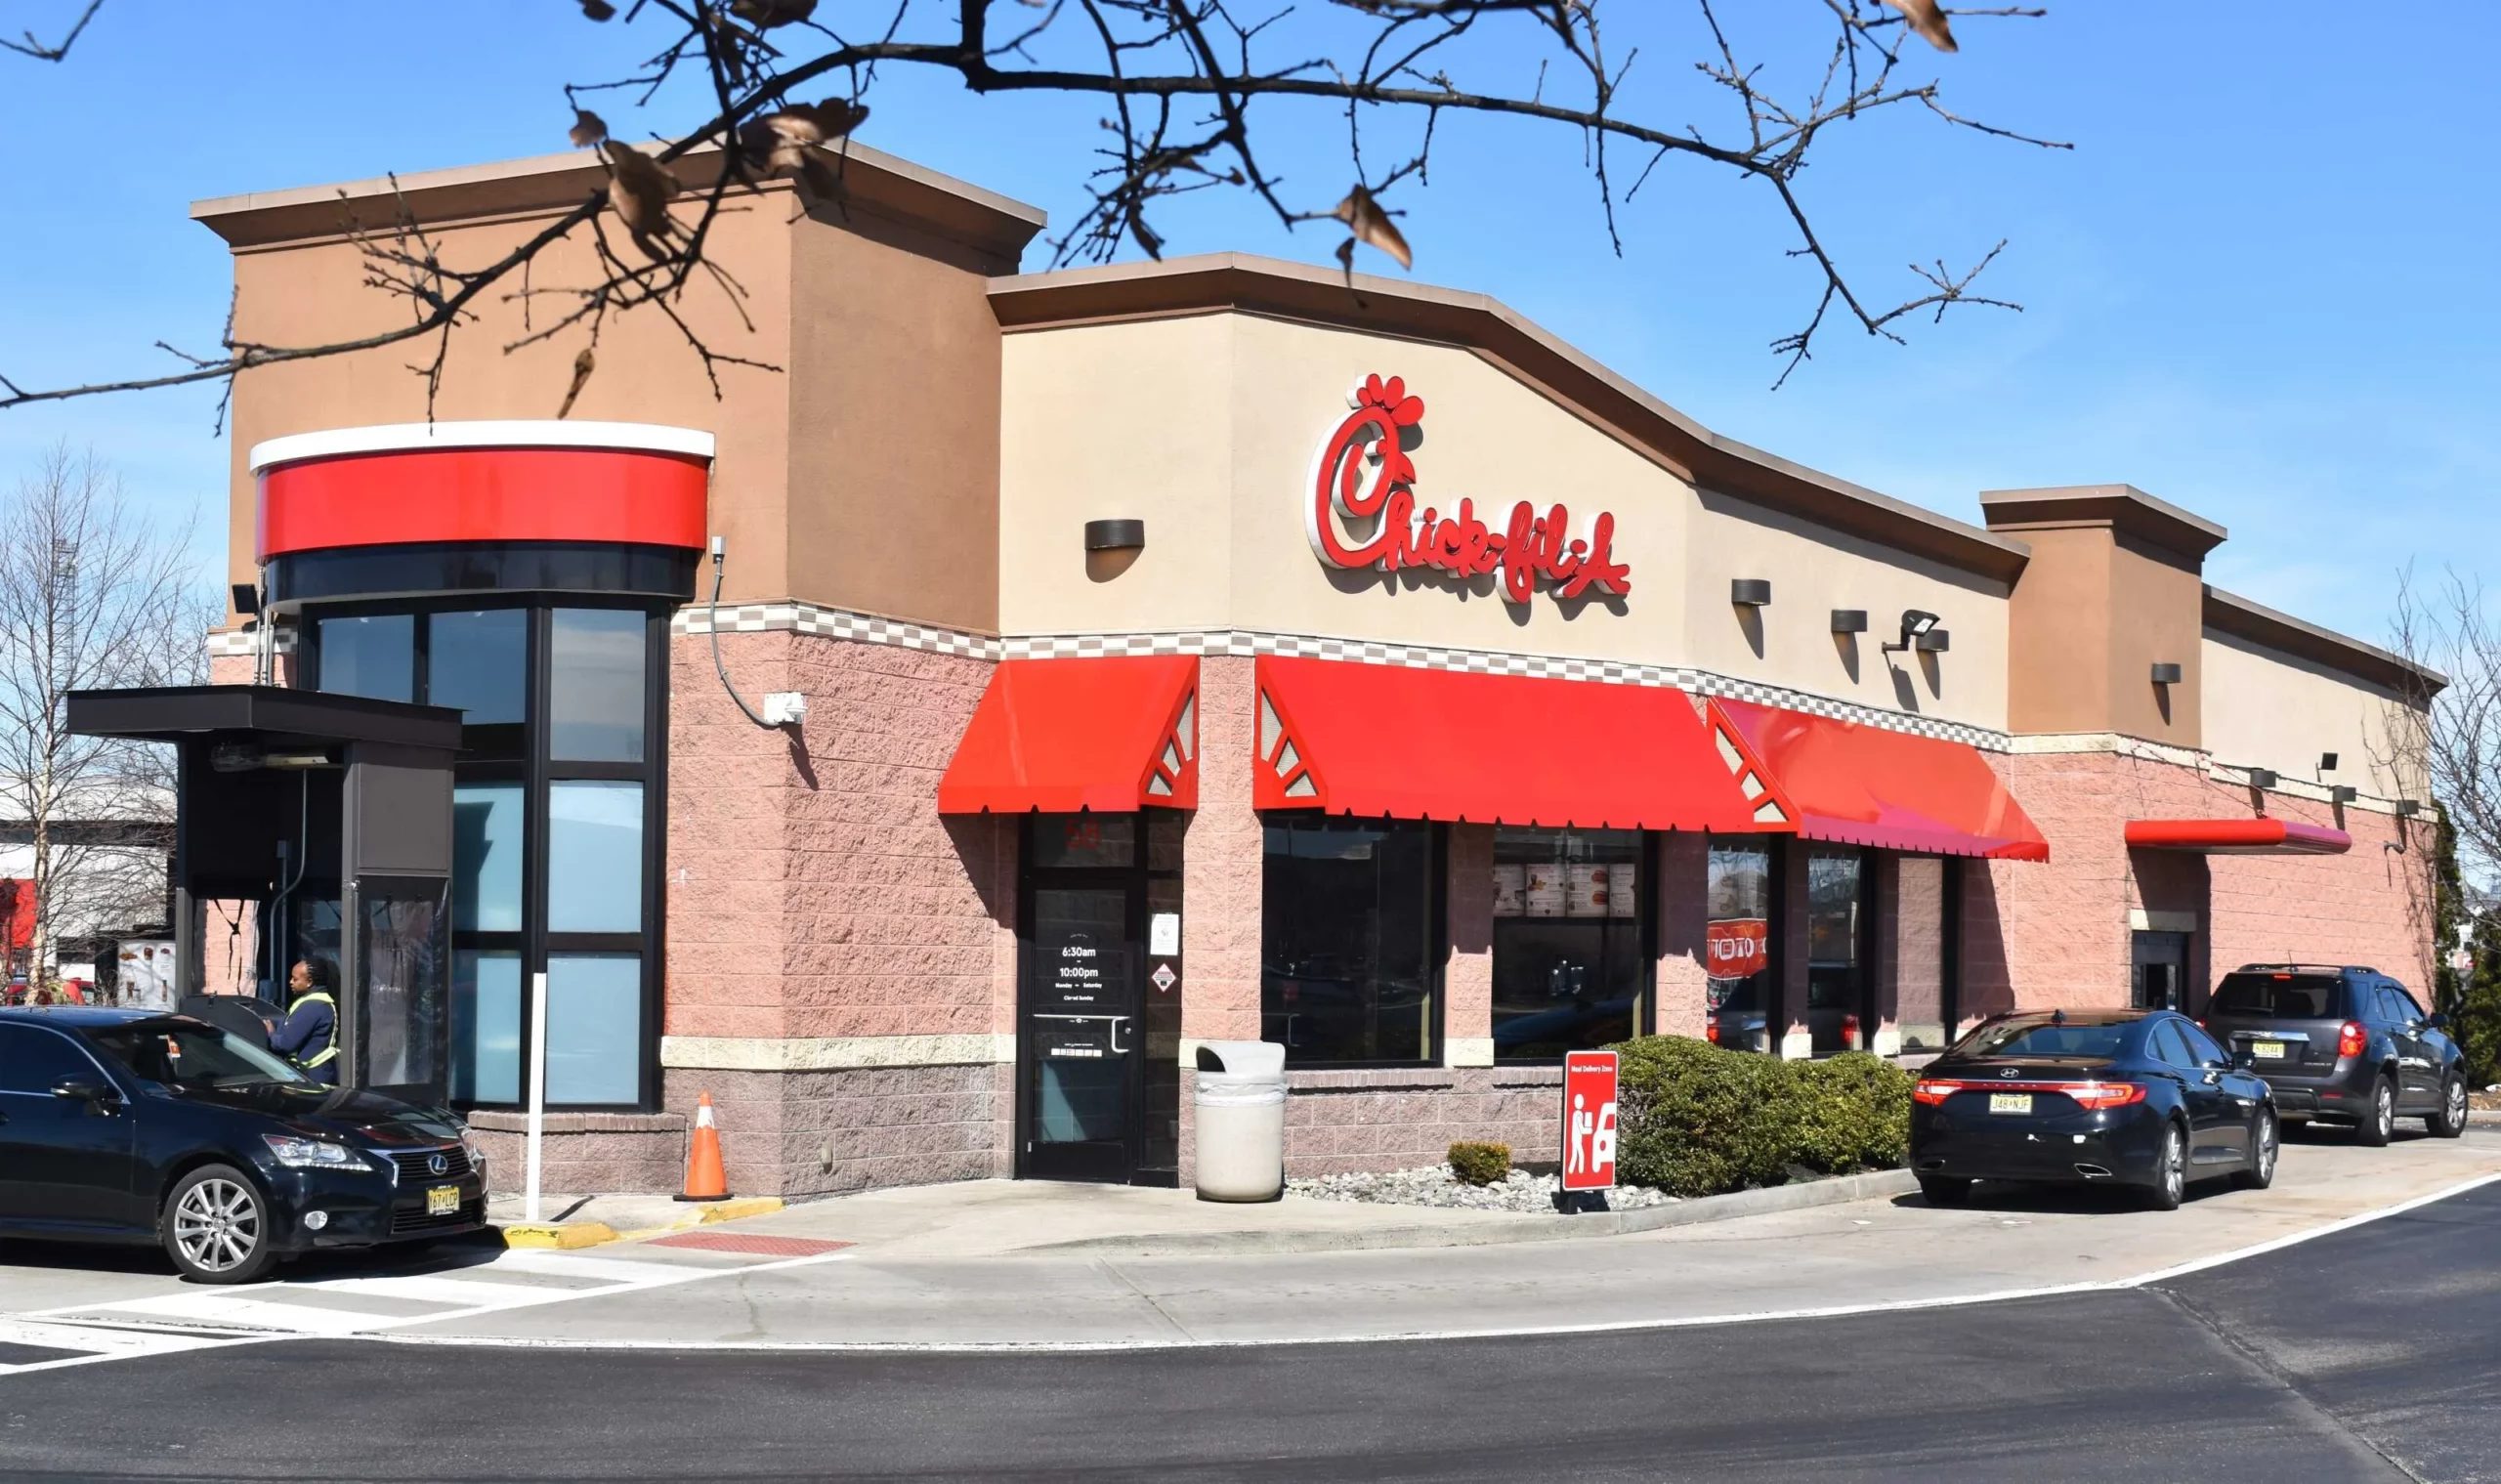 Drive-Thru and Mobile Ordering at Chick-fil-A